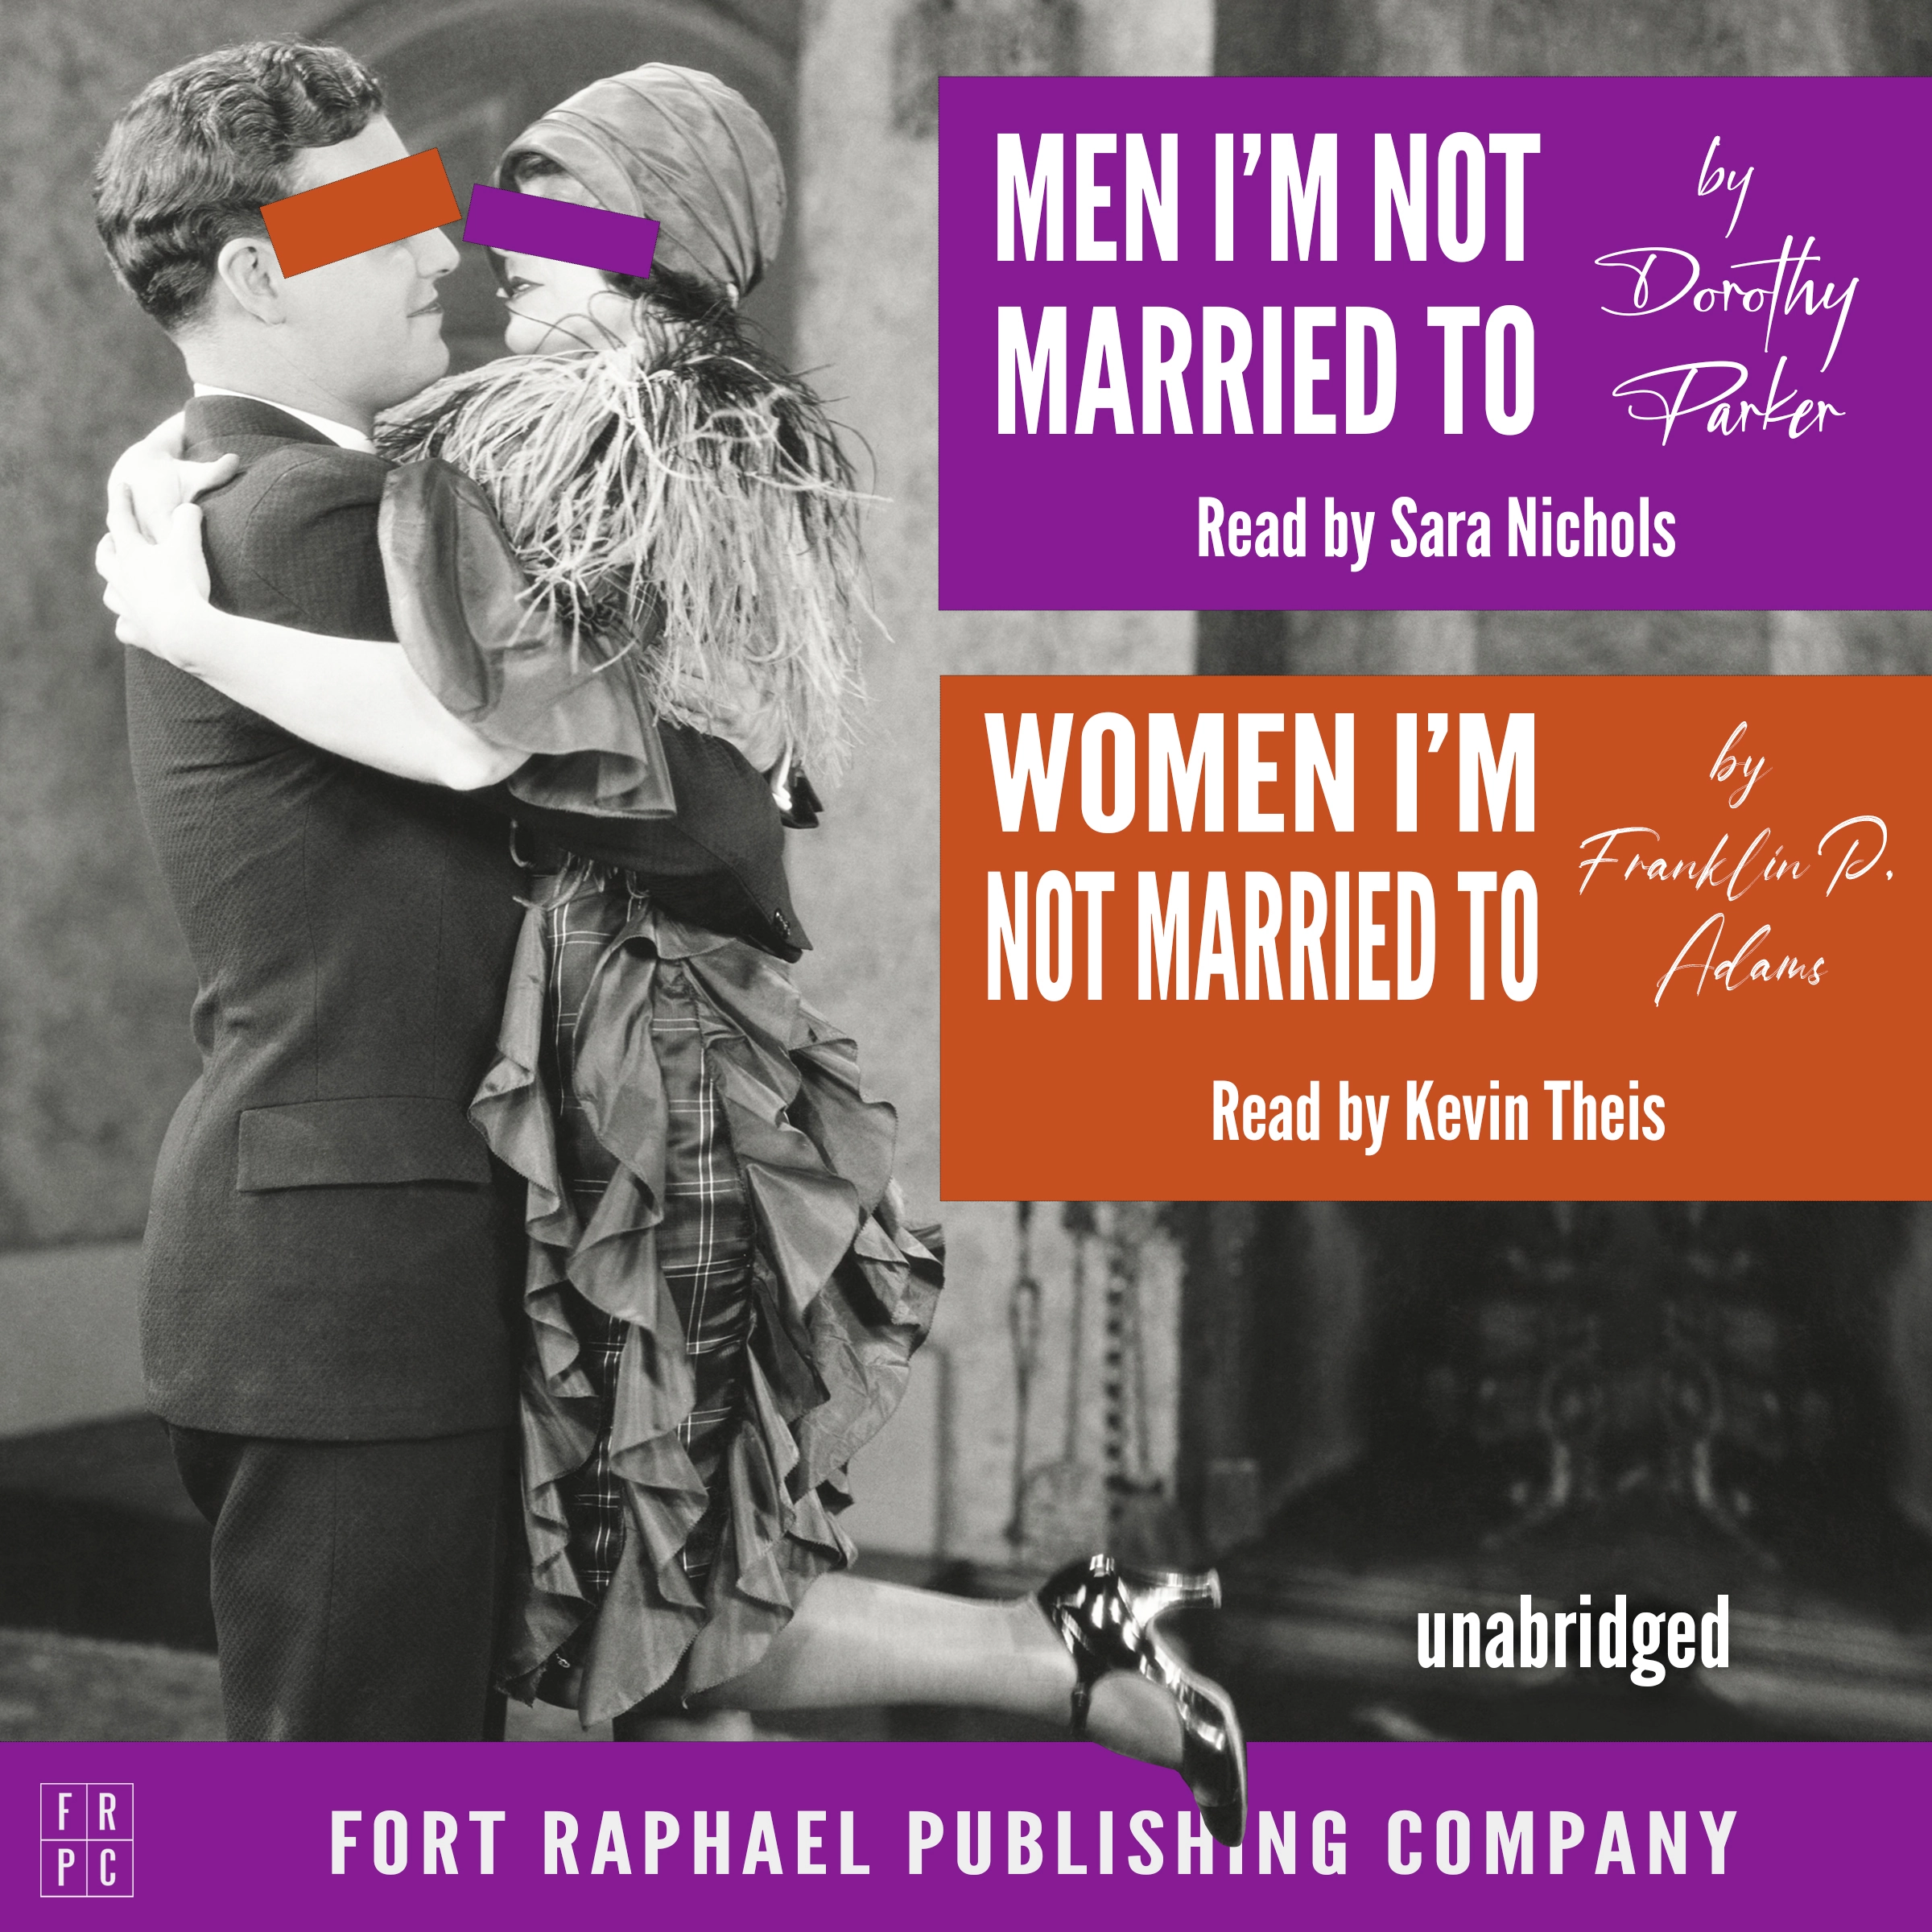 Men I'm Not Married To and Women I'm Not Married To - Unabridged by Franklin P. Adams Audiobook